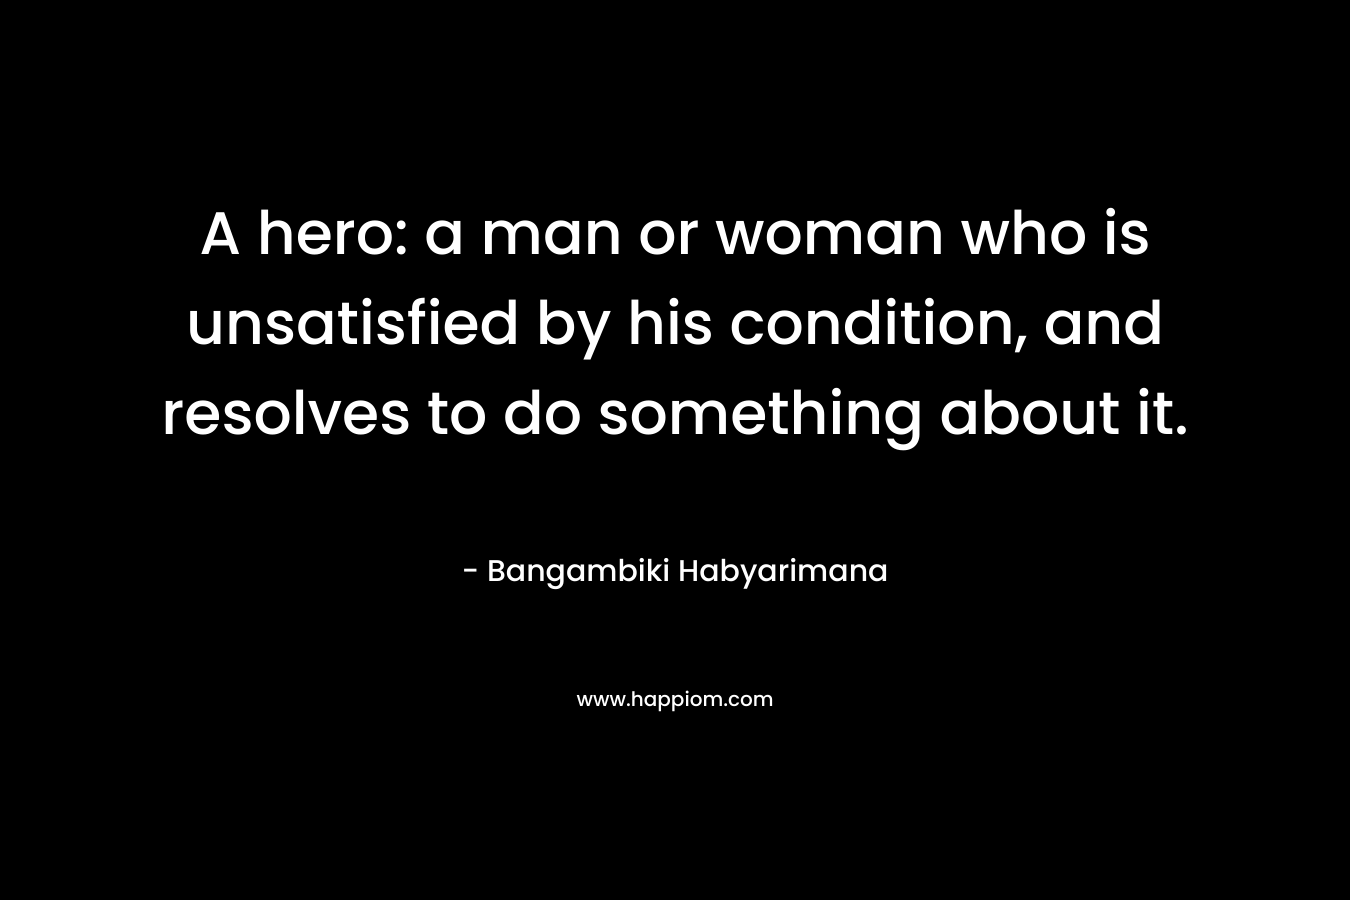 A hero: a man or woman who is unsatisfied by his condition, and resolves to do something about it. – Bangambiki Habyarimana